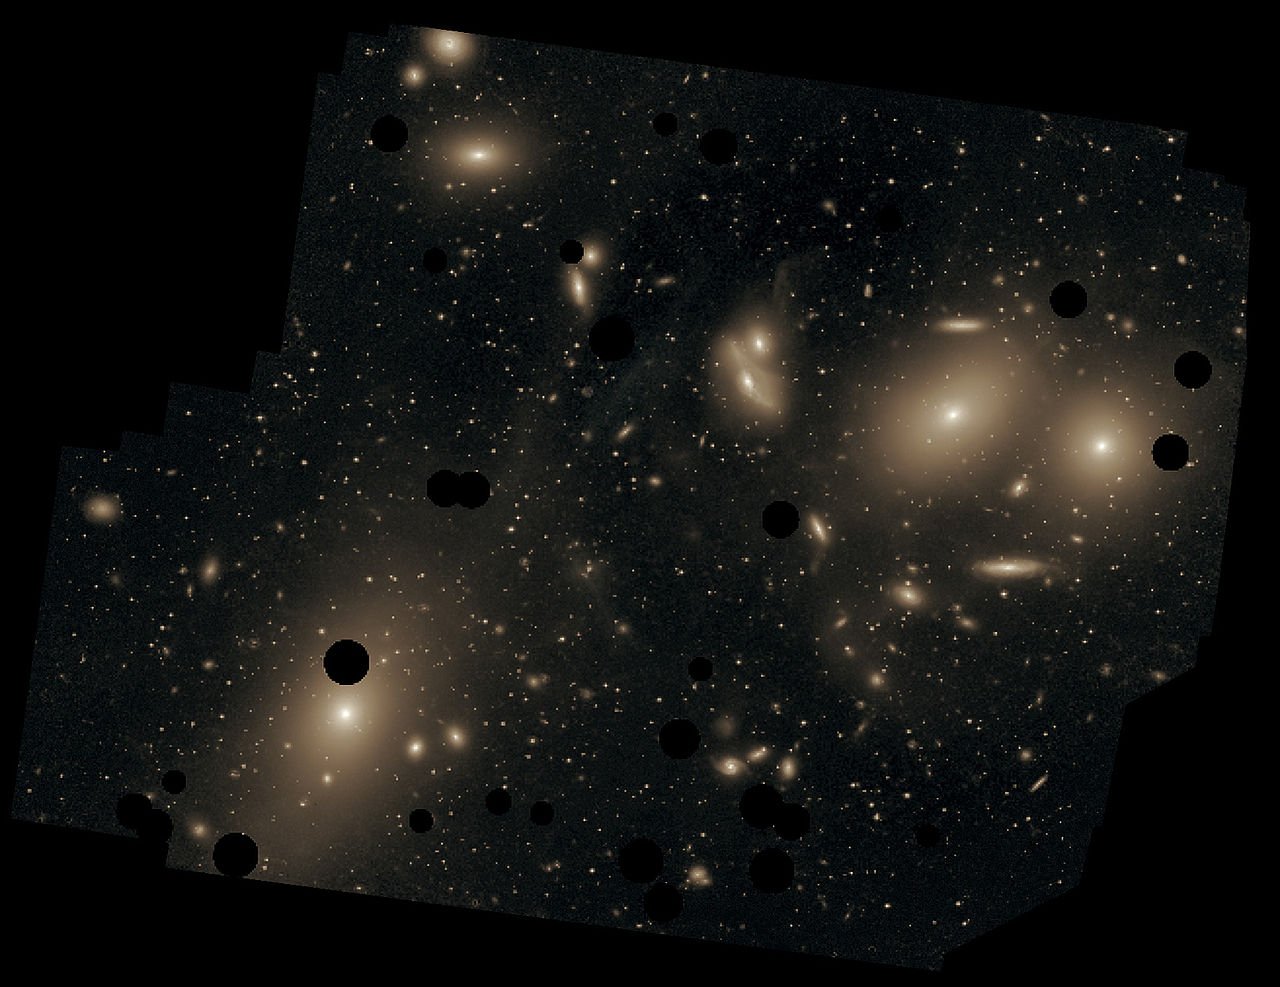 The Virgo Cluster of galaxies, with the giant elliptical galaxy M87 at the upper left. 